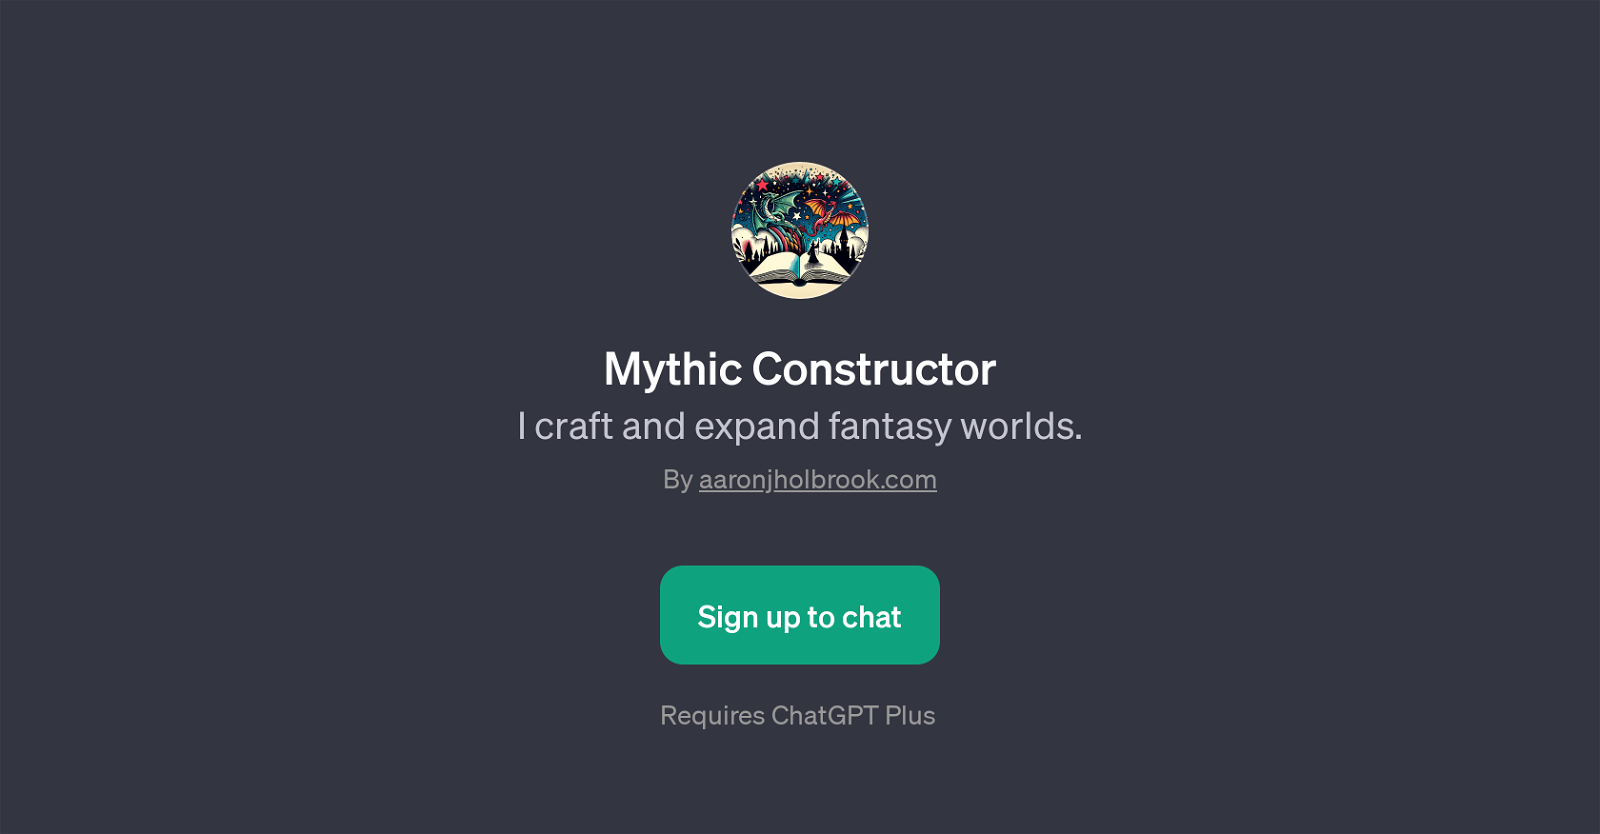 Mythic Constructor website